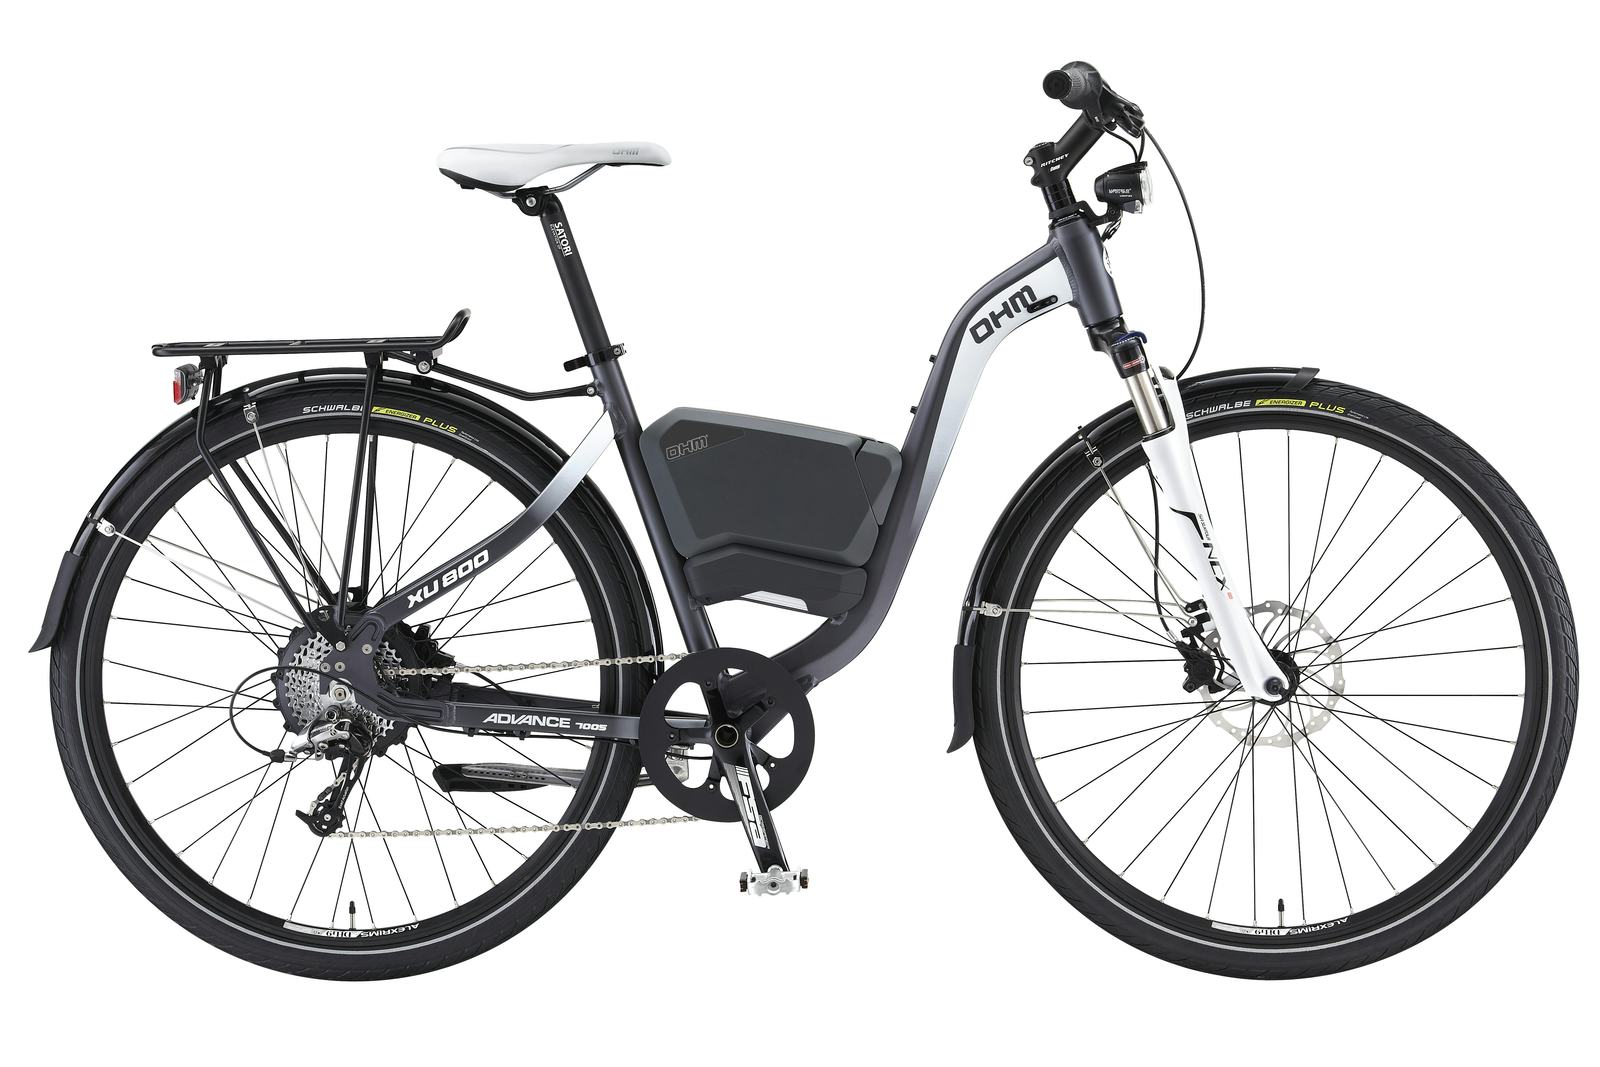 OHM Cycles and Swedish Höganäs partnered in e-bike project. - Photo OHM